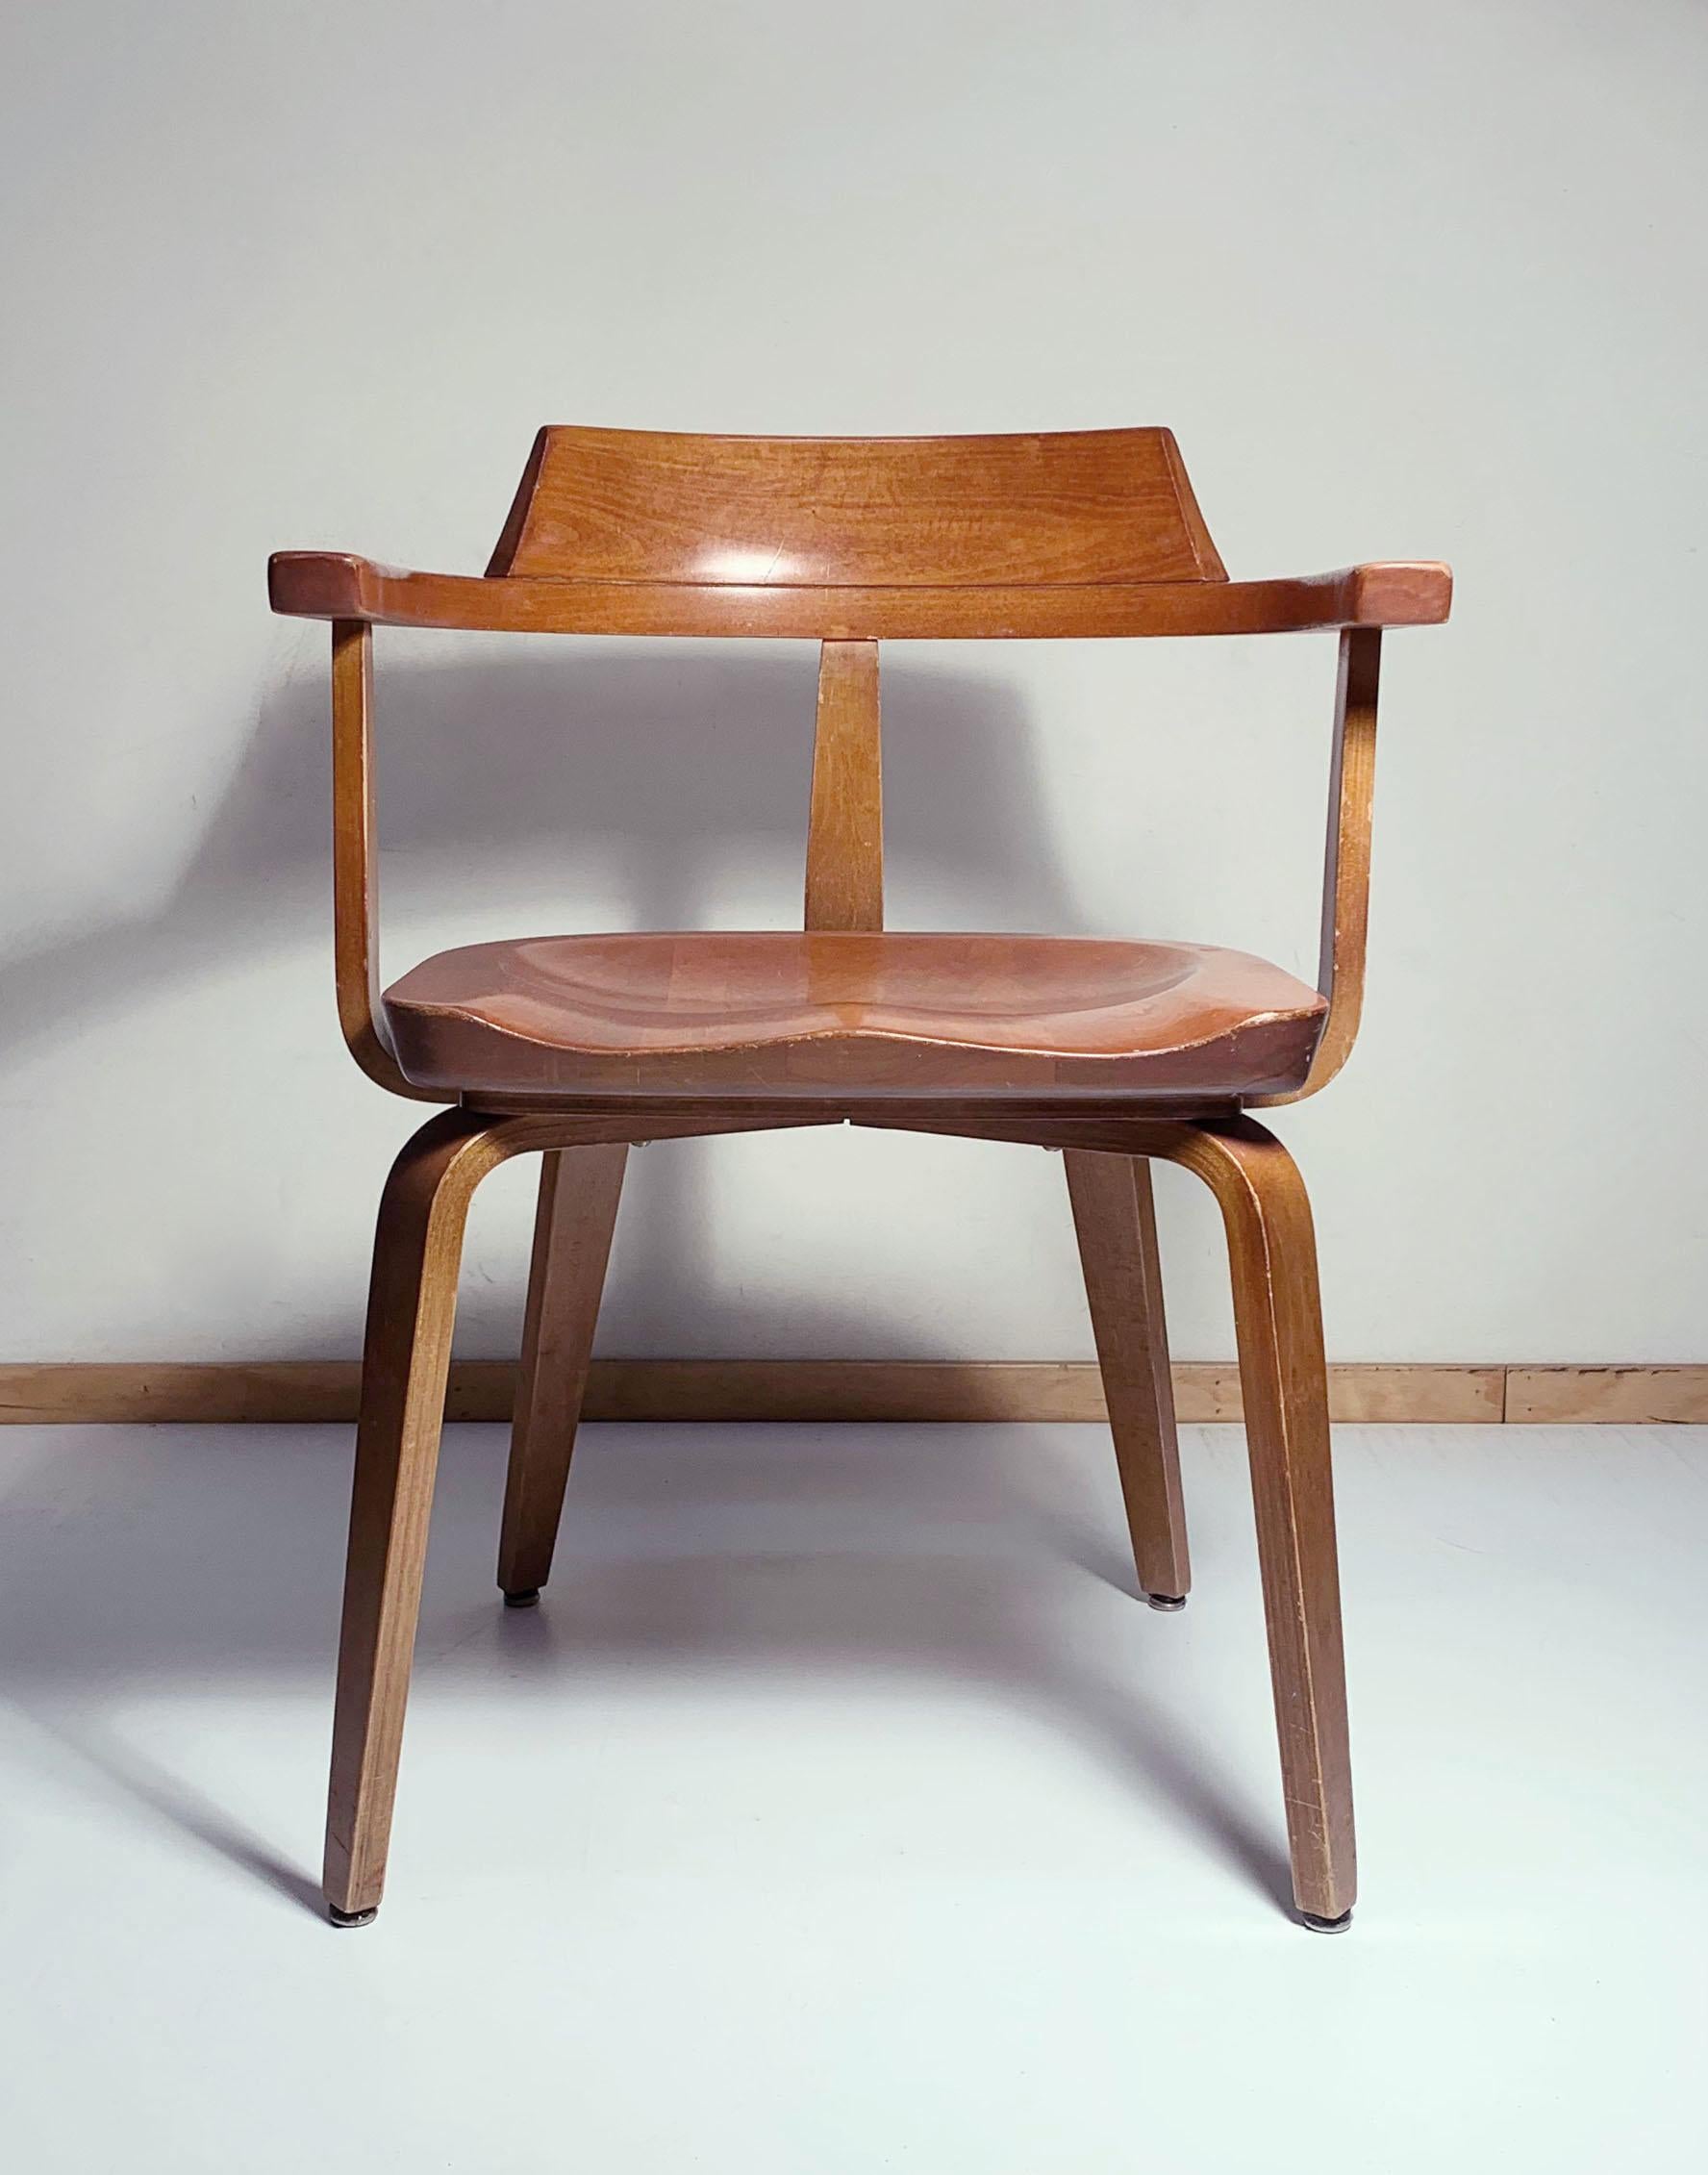 Pair of Walter Gropius chairs for Thonet. Additional chairs in stock if a larger set is required. This listing is for 2 chairs.